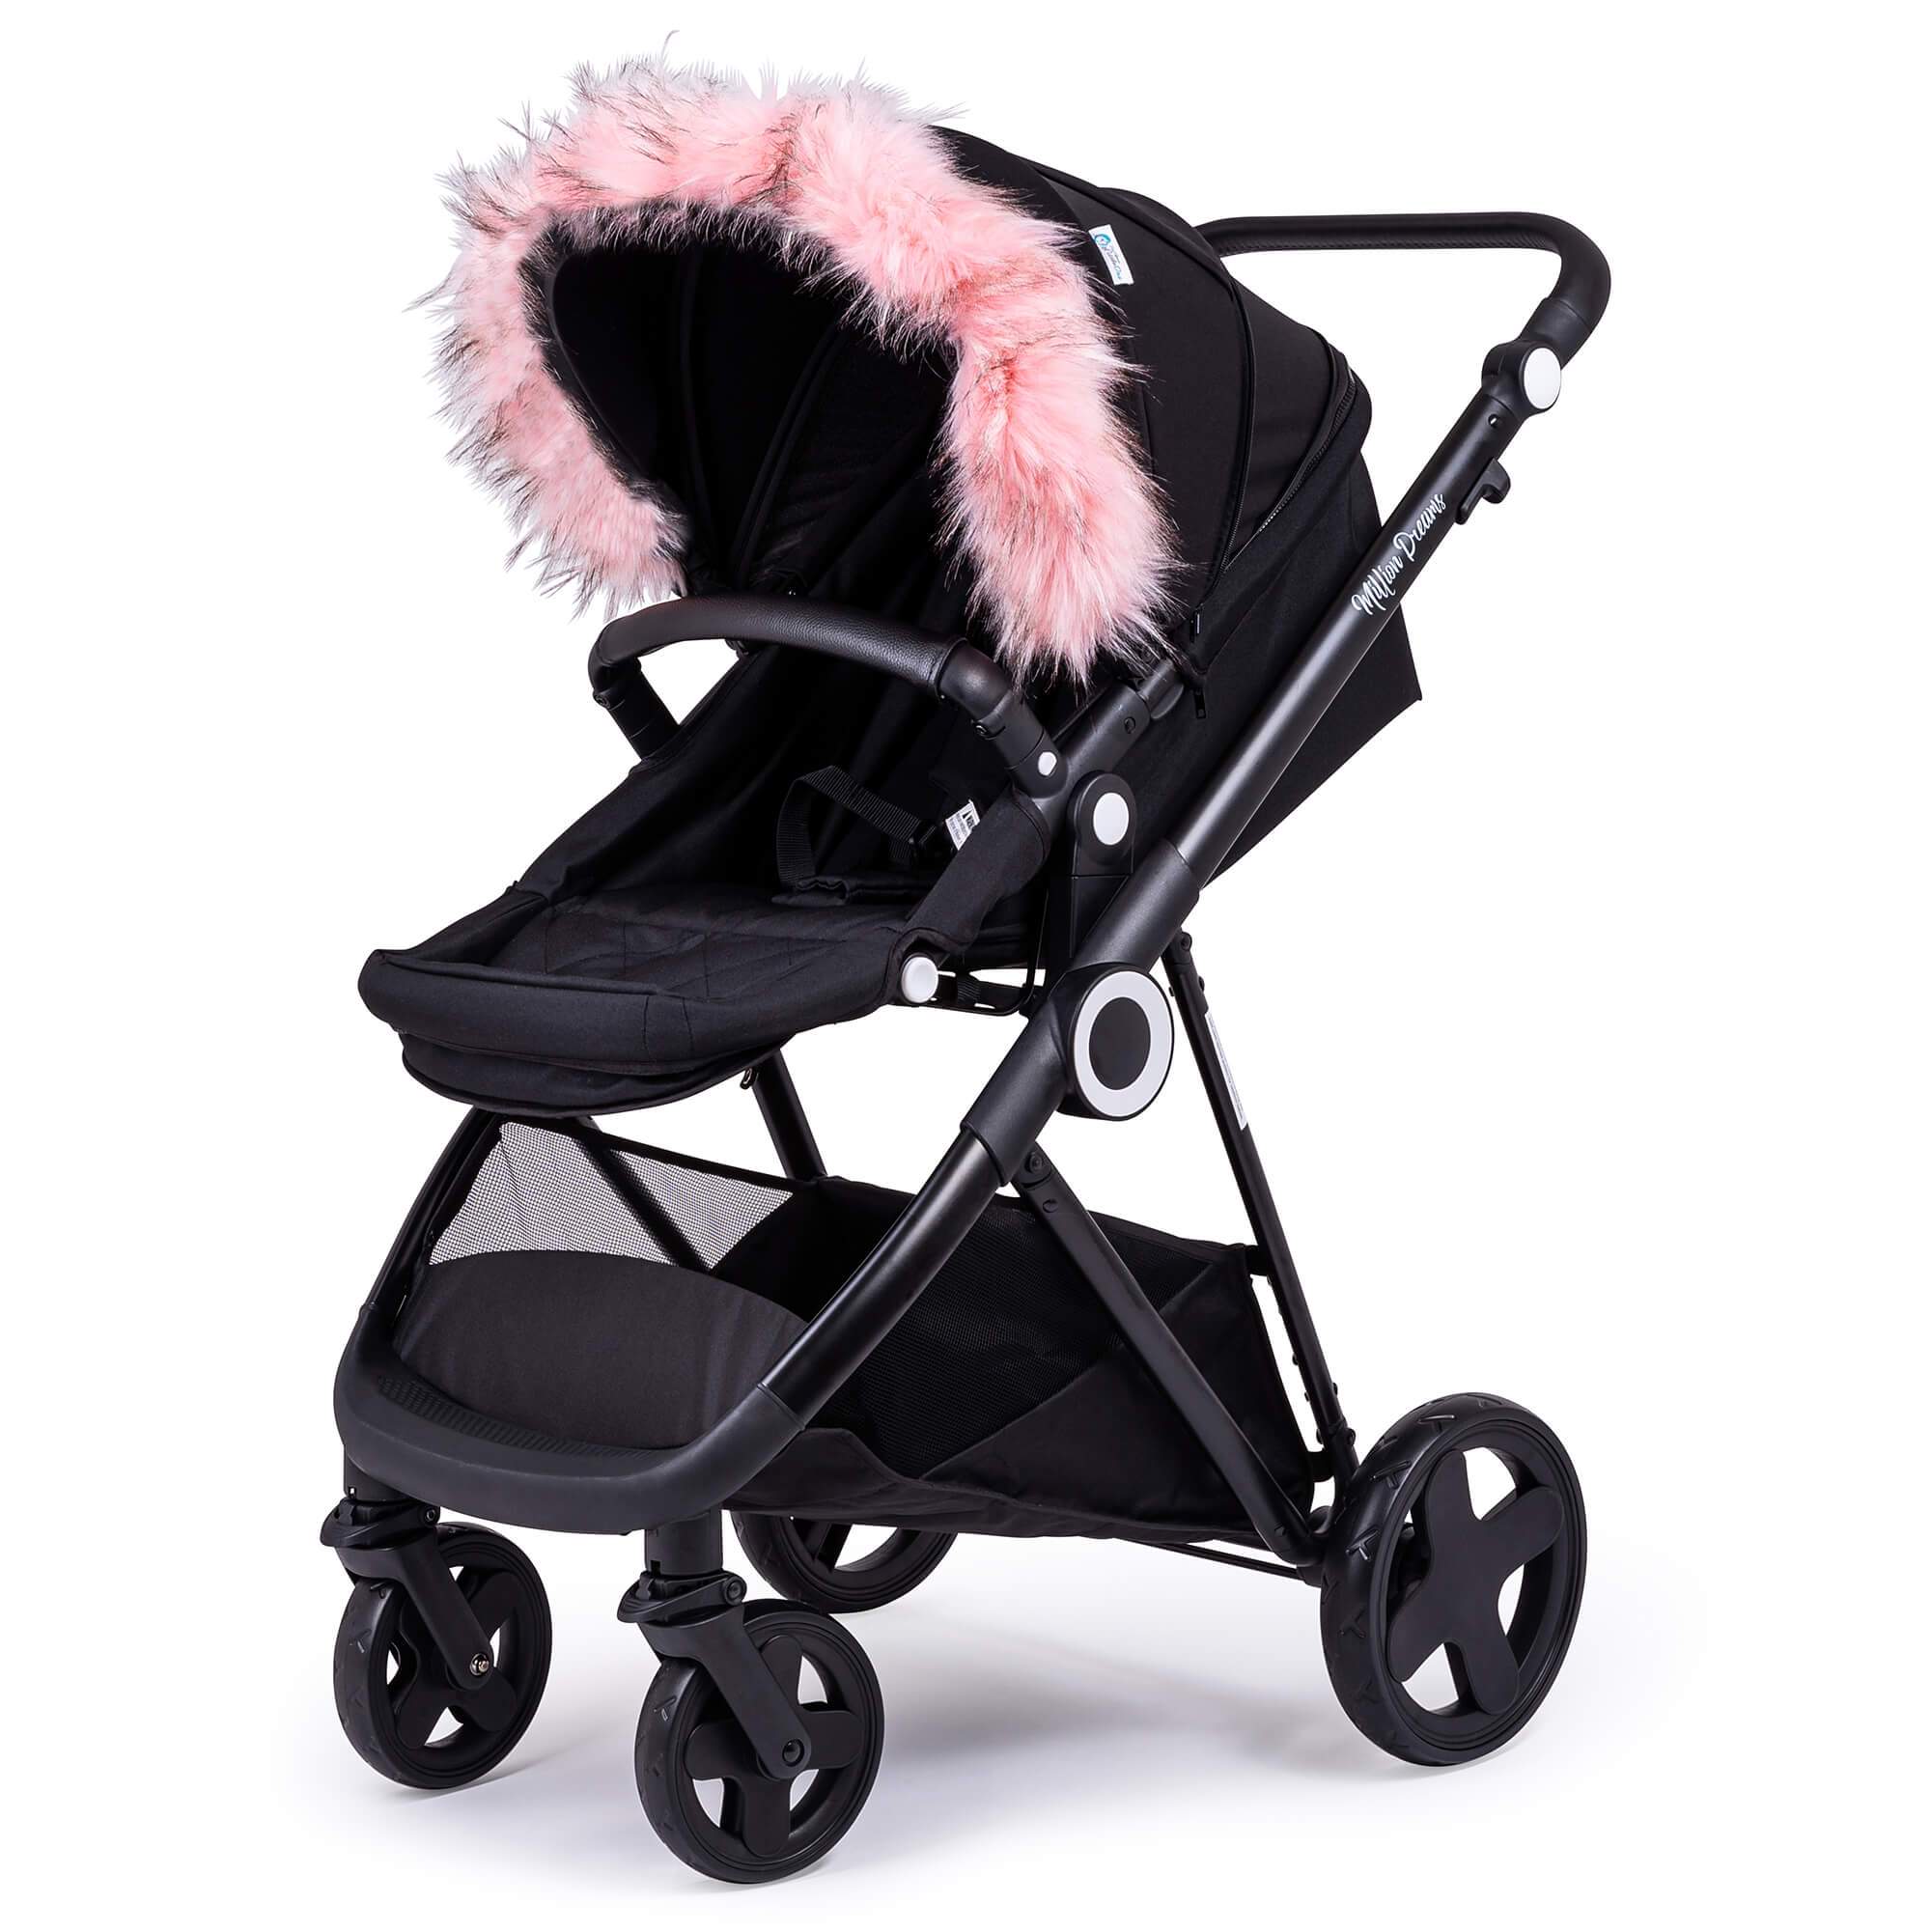 Pram Fur Hood Trim Attachment for Pushchair Compatible with Venicci - For Your Little One